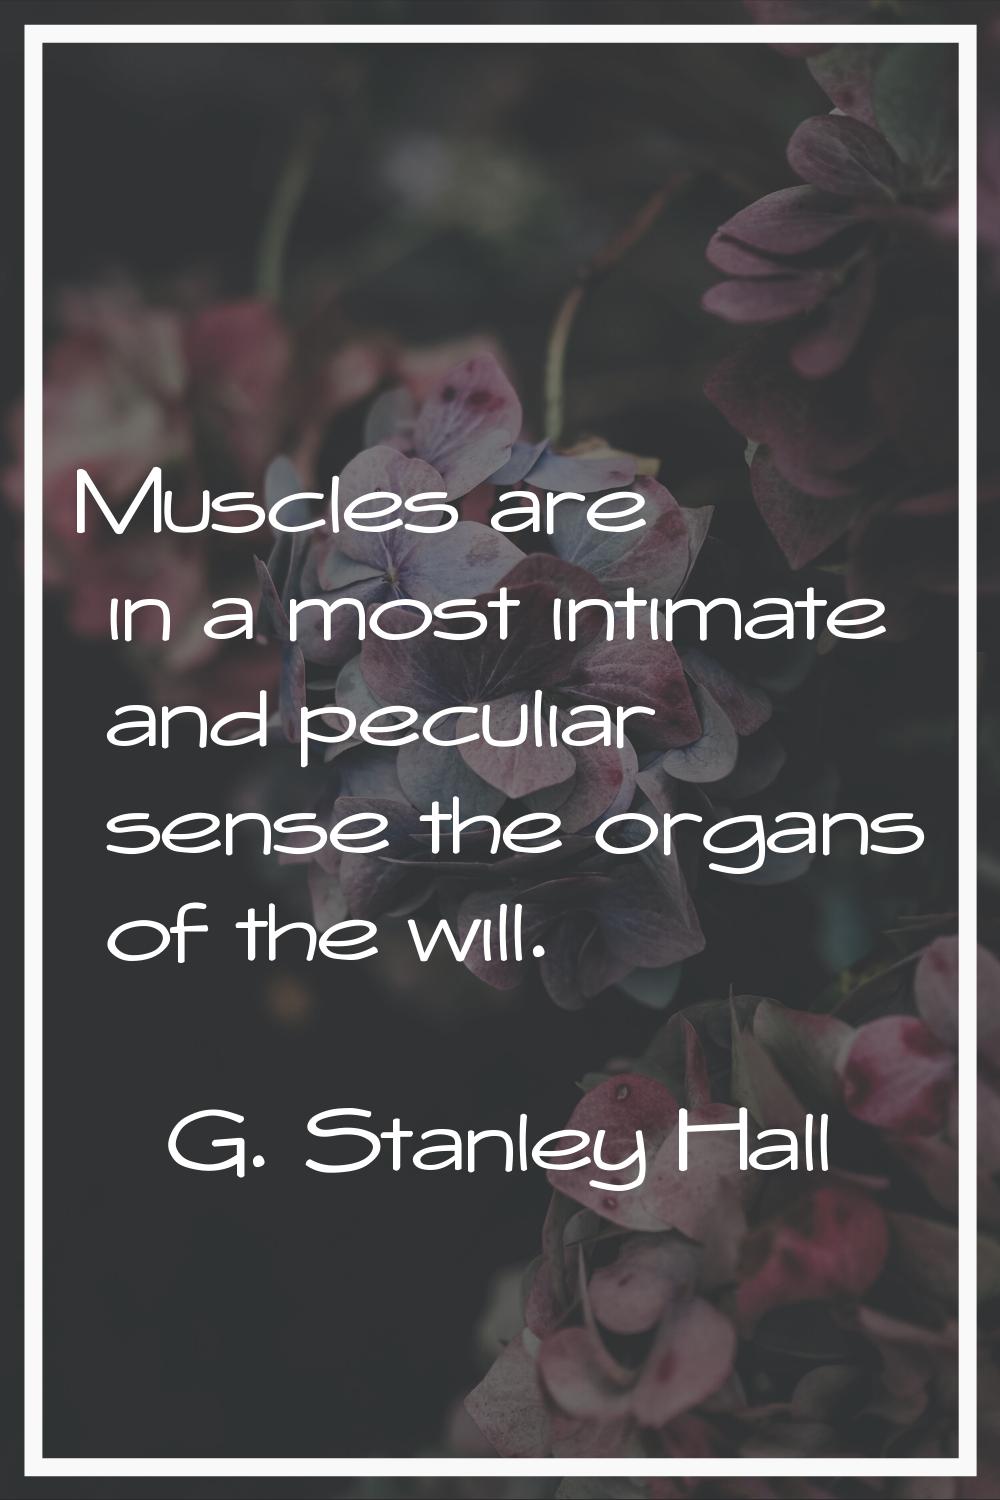 Muscles are in a most intimate and peculiar sense the organs of the will.